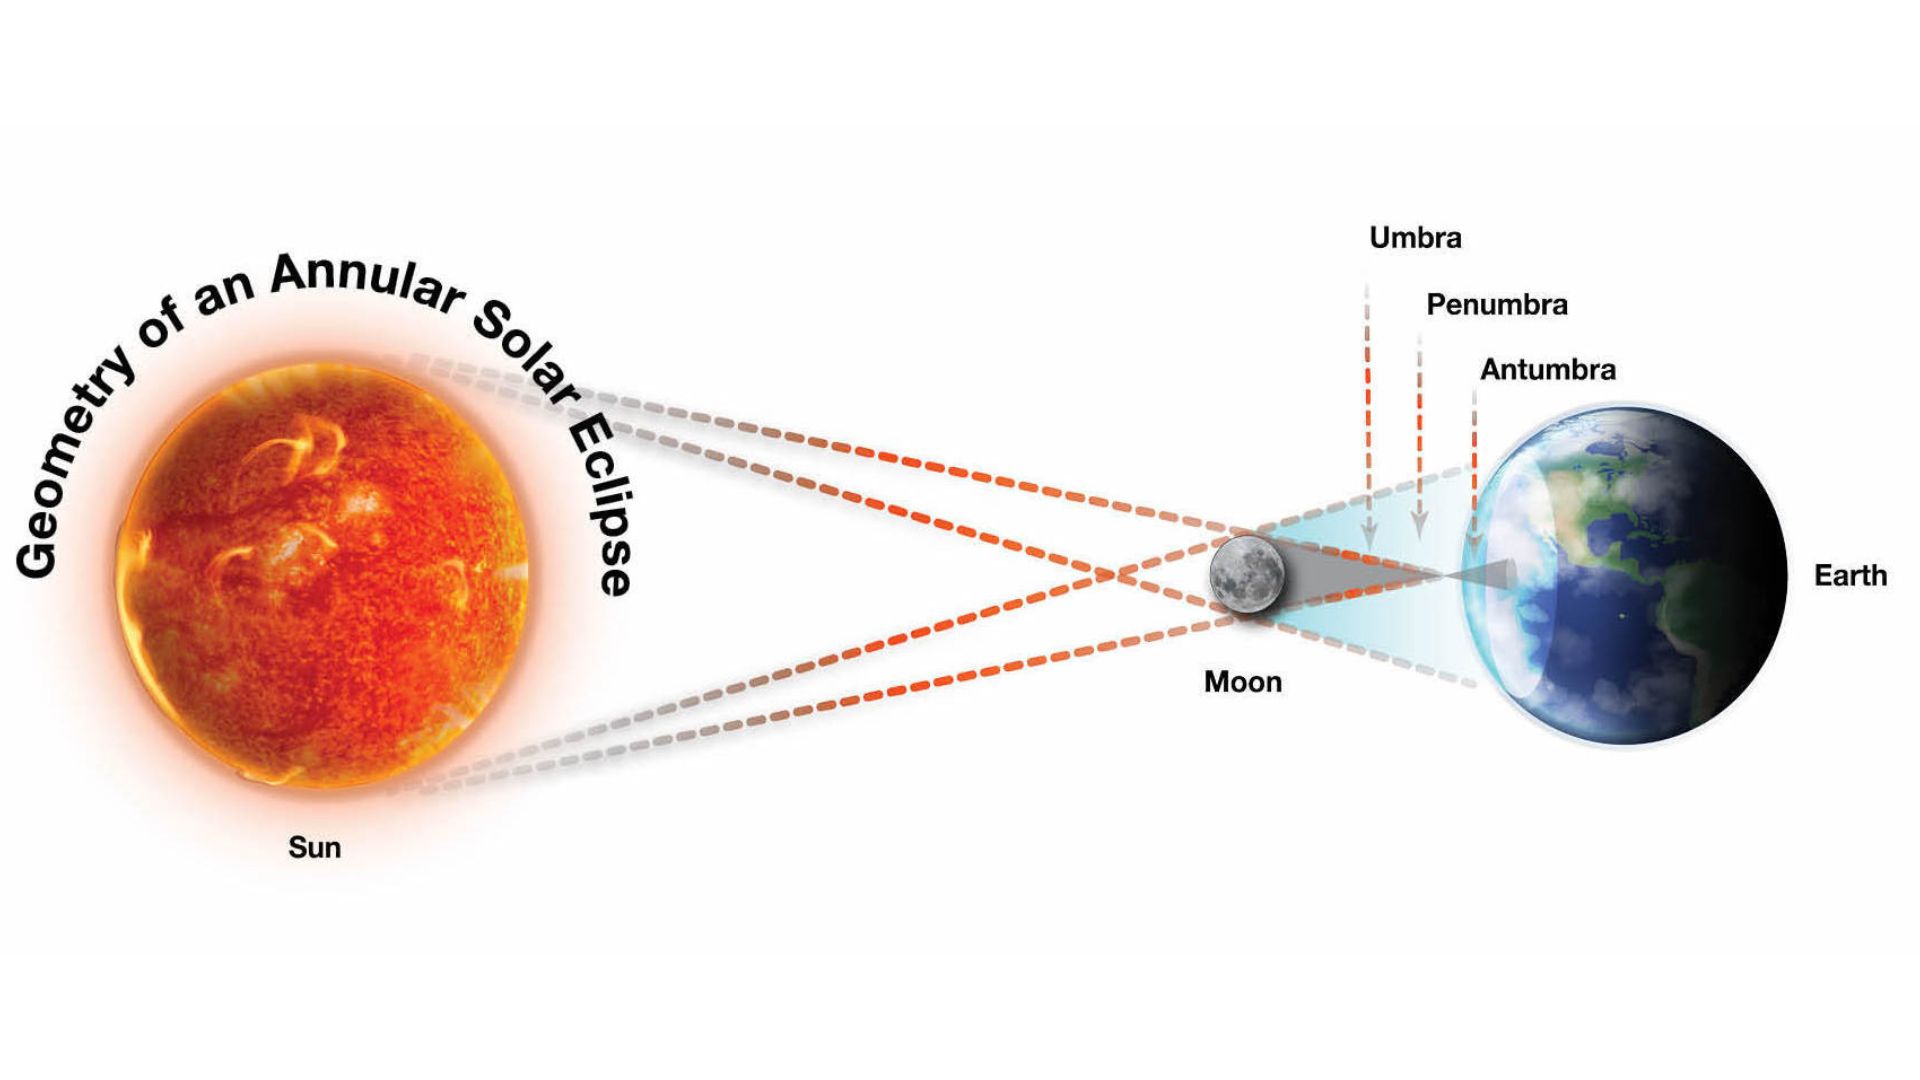 graphic illustration showing the geometry of an annular solar eclipse and how the moon's shadow causes an infamous ring of fire during an annular solar eclipse.